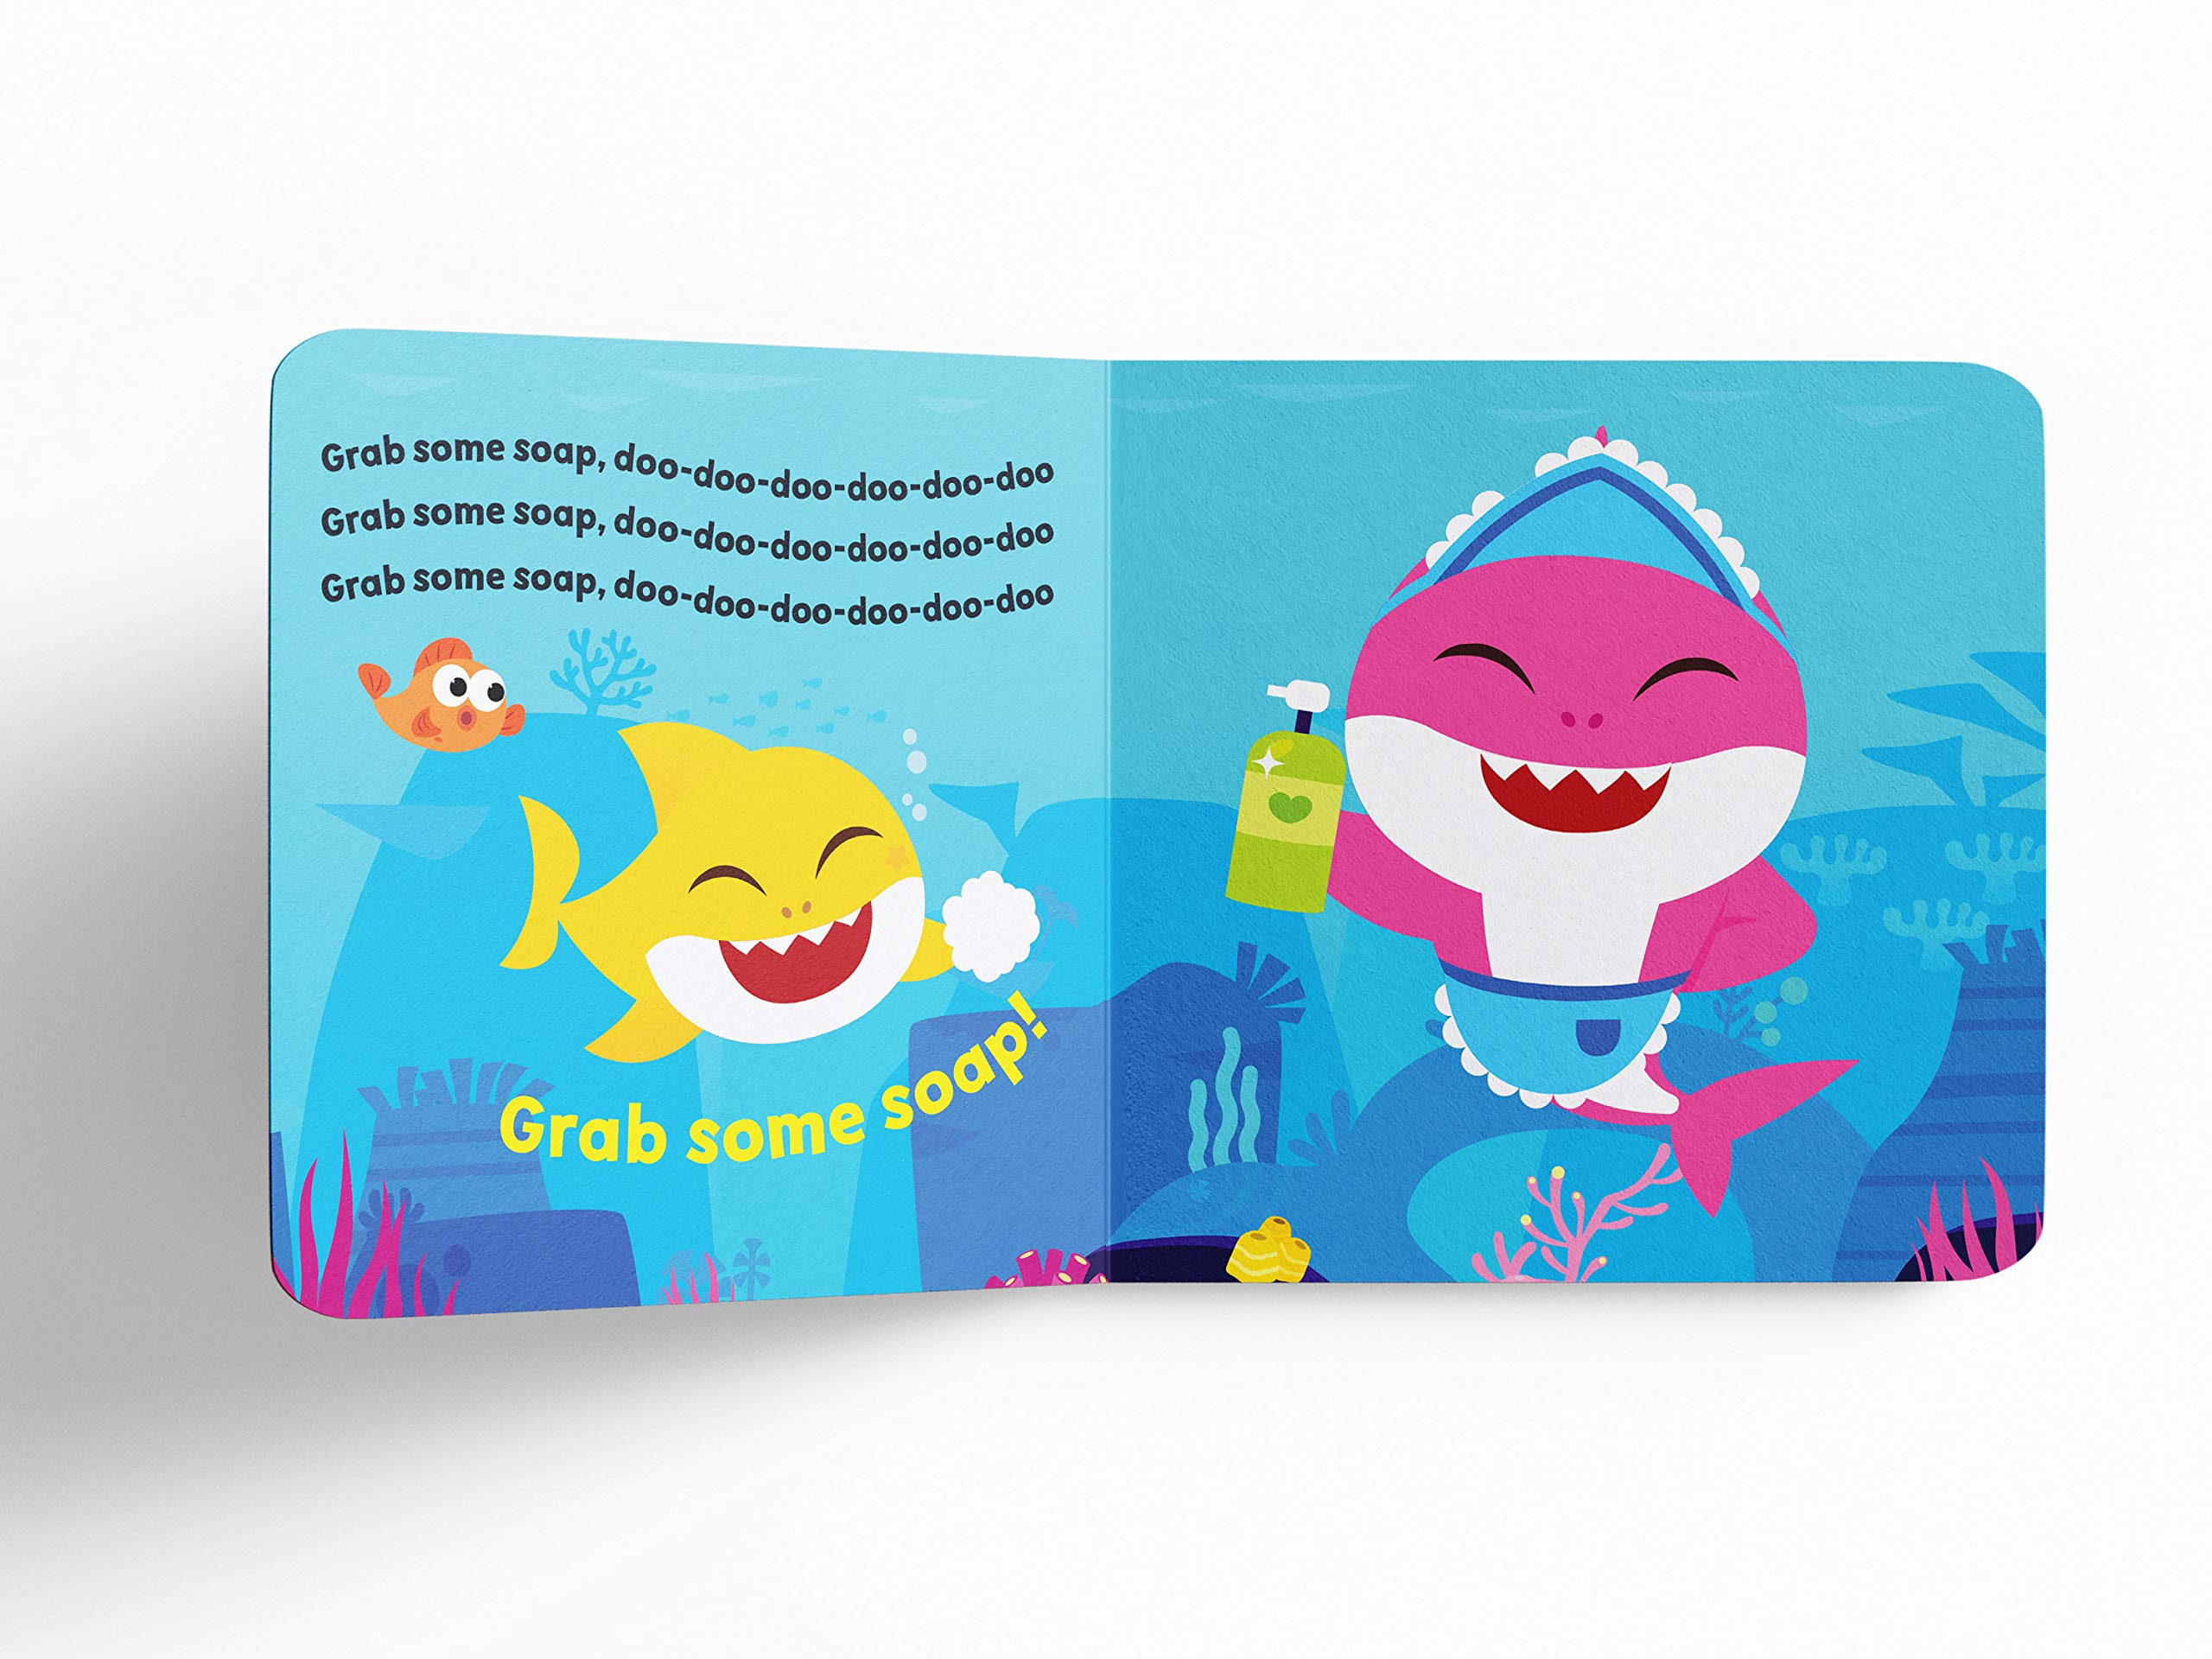 Pinkfong Baby Shark - Wash Your Hands